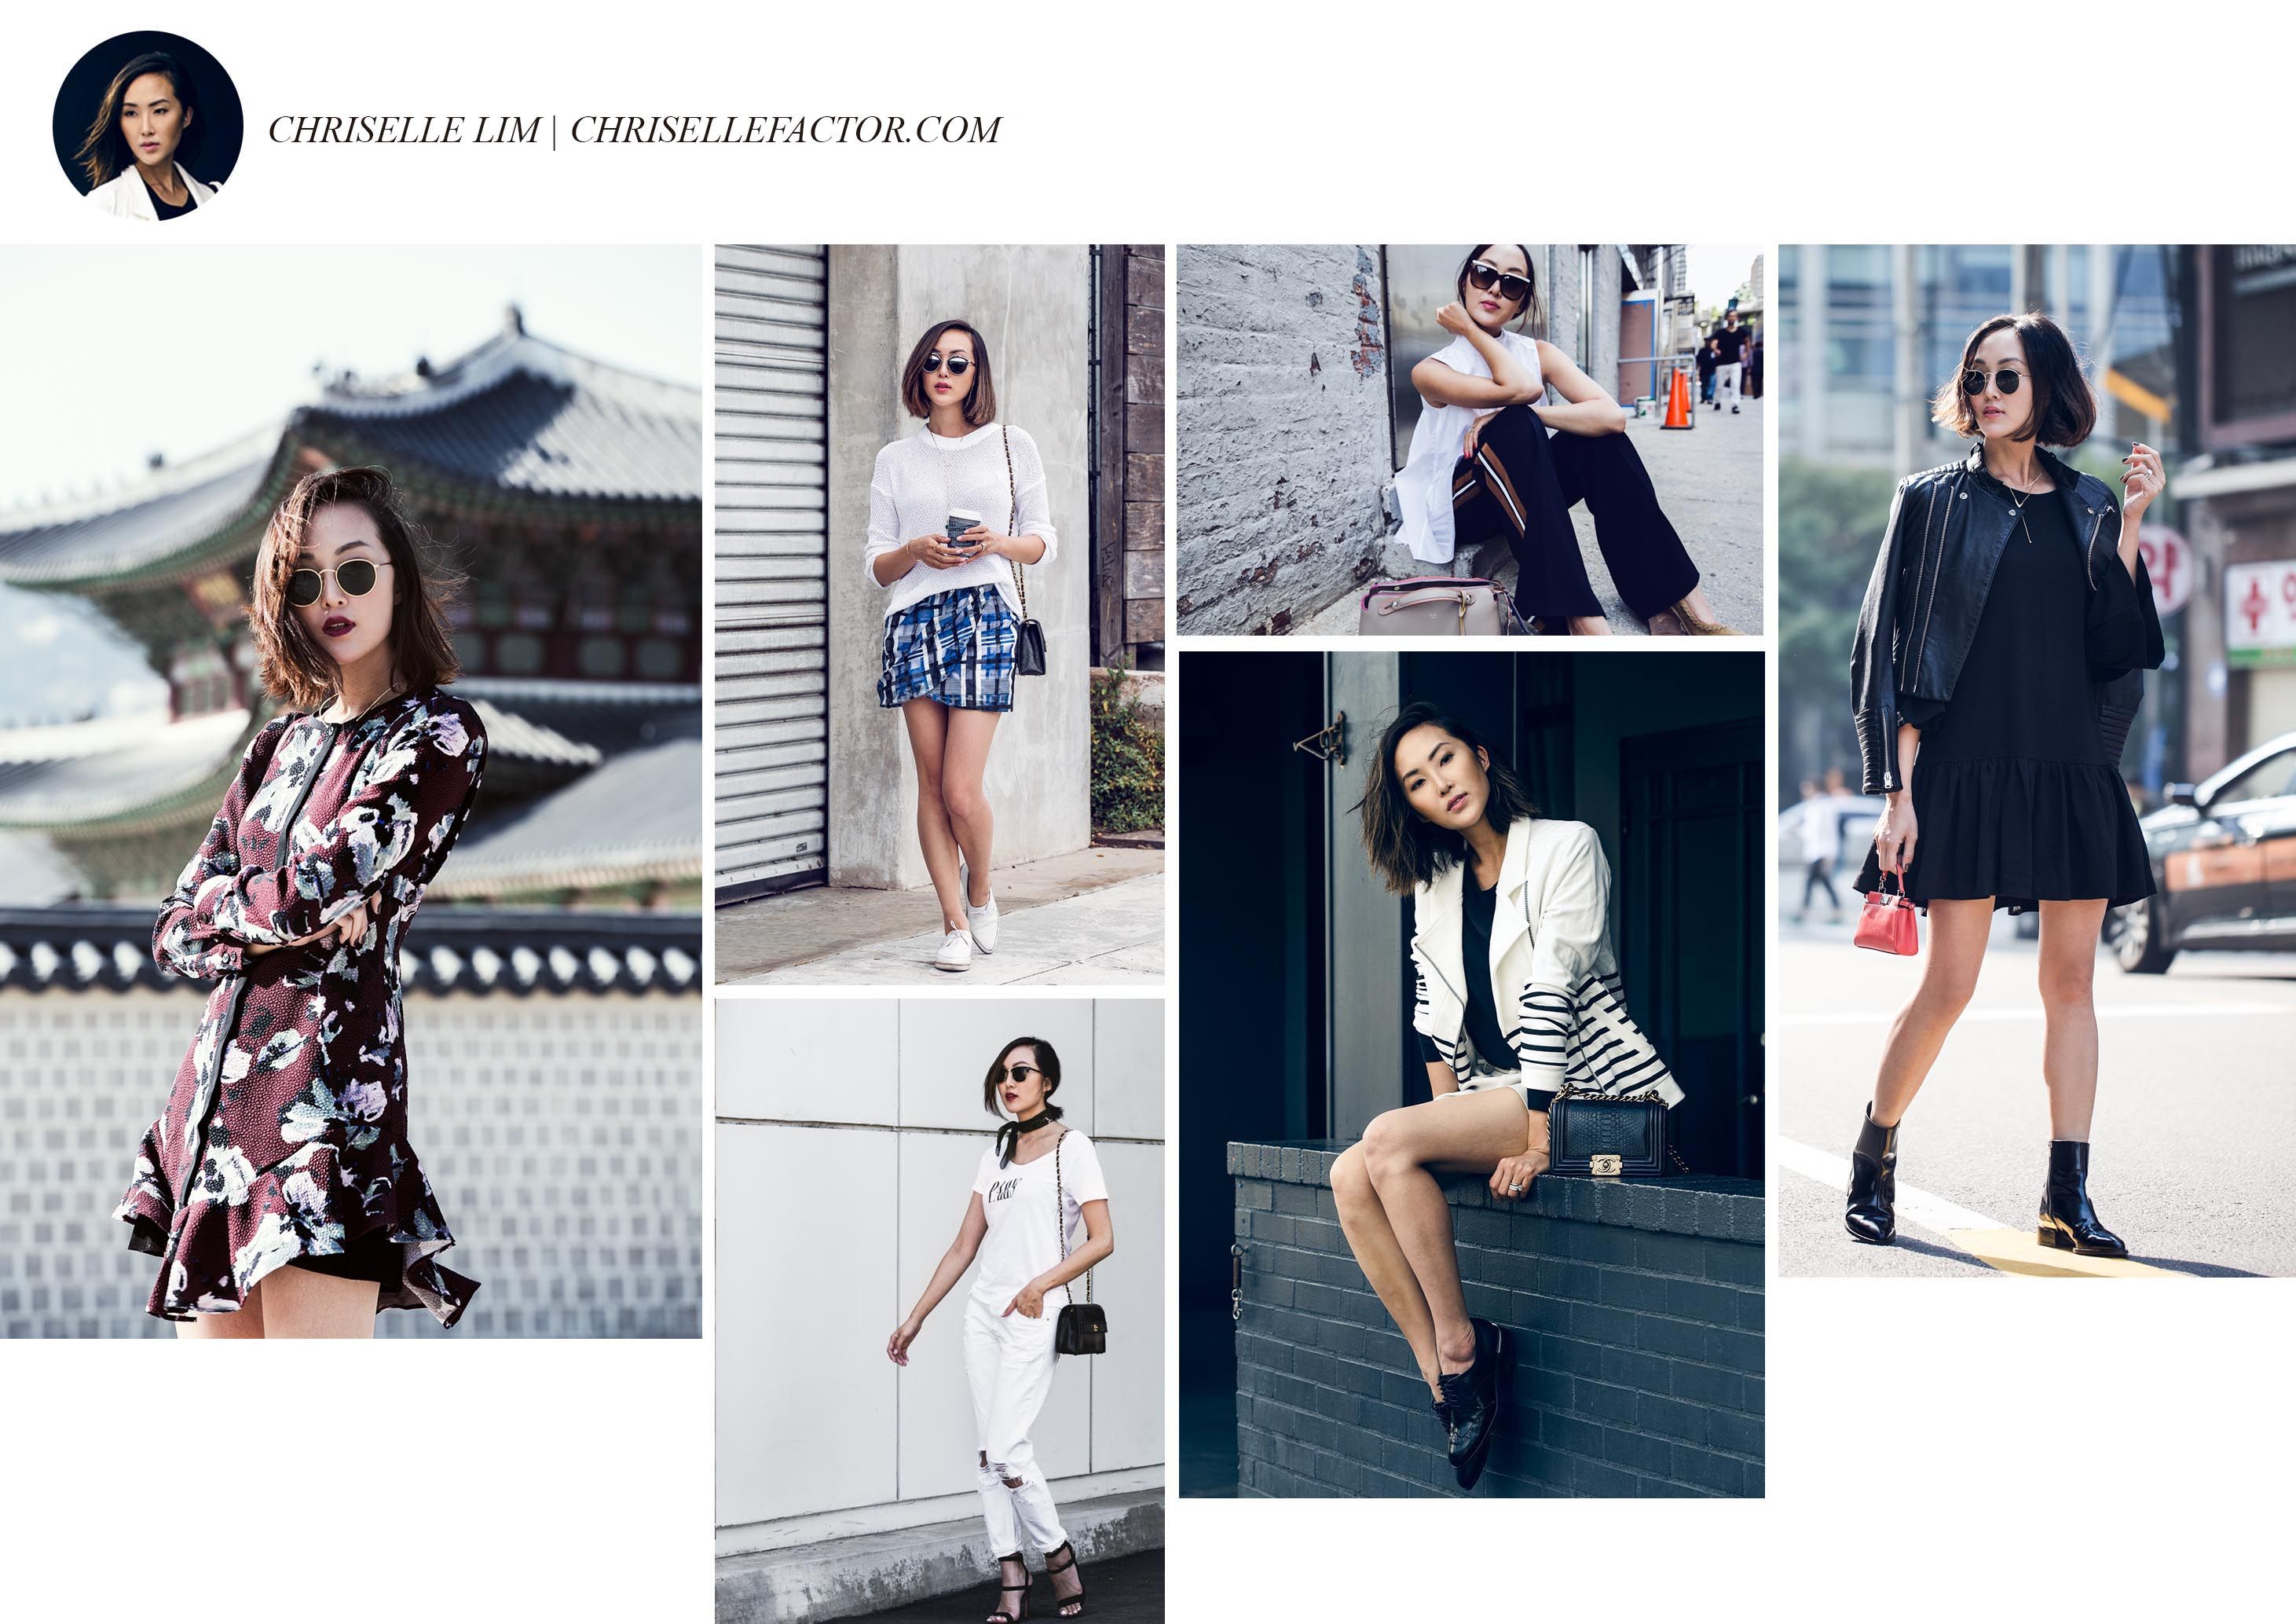 Top 10 Fashion Bloggers in the World, These Are Their Crazy Achievements!